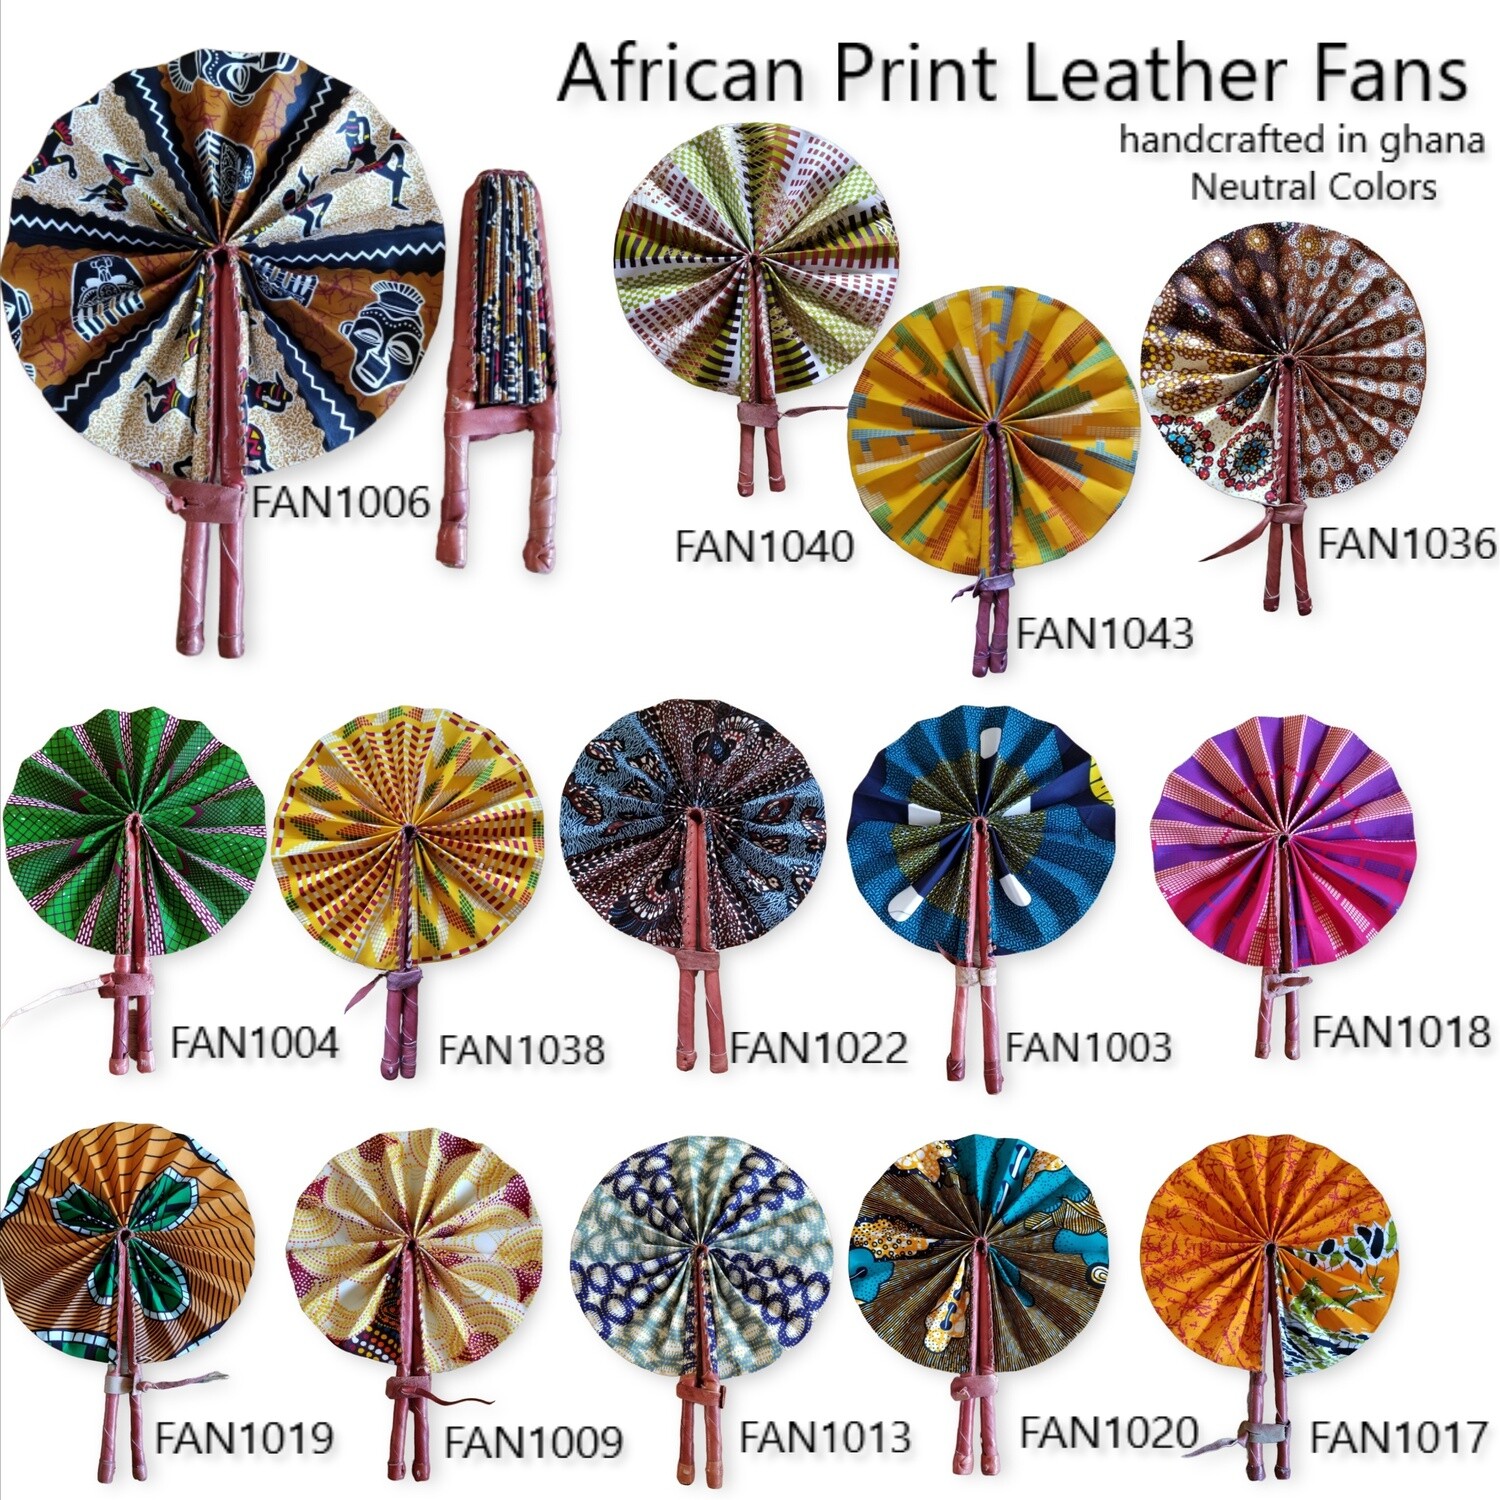 African Print Leather Fans (neutral colors)